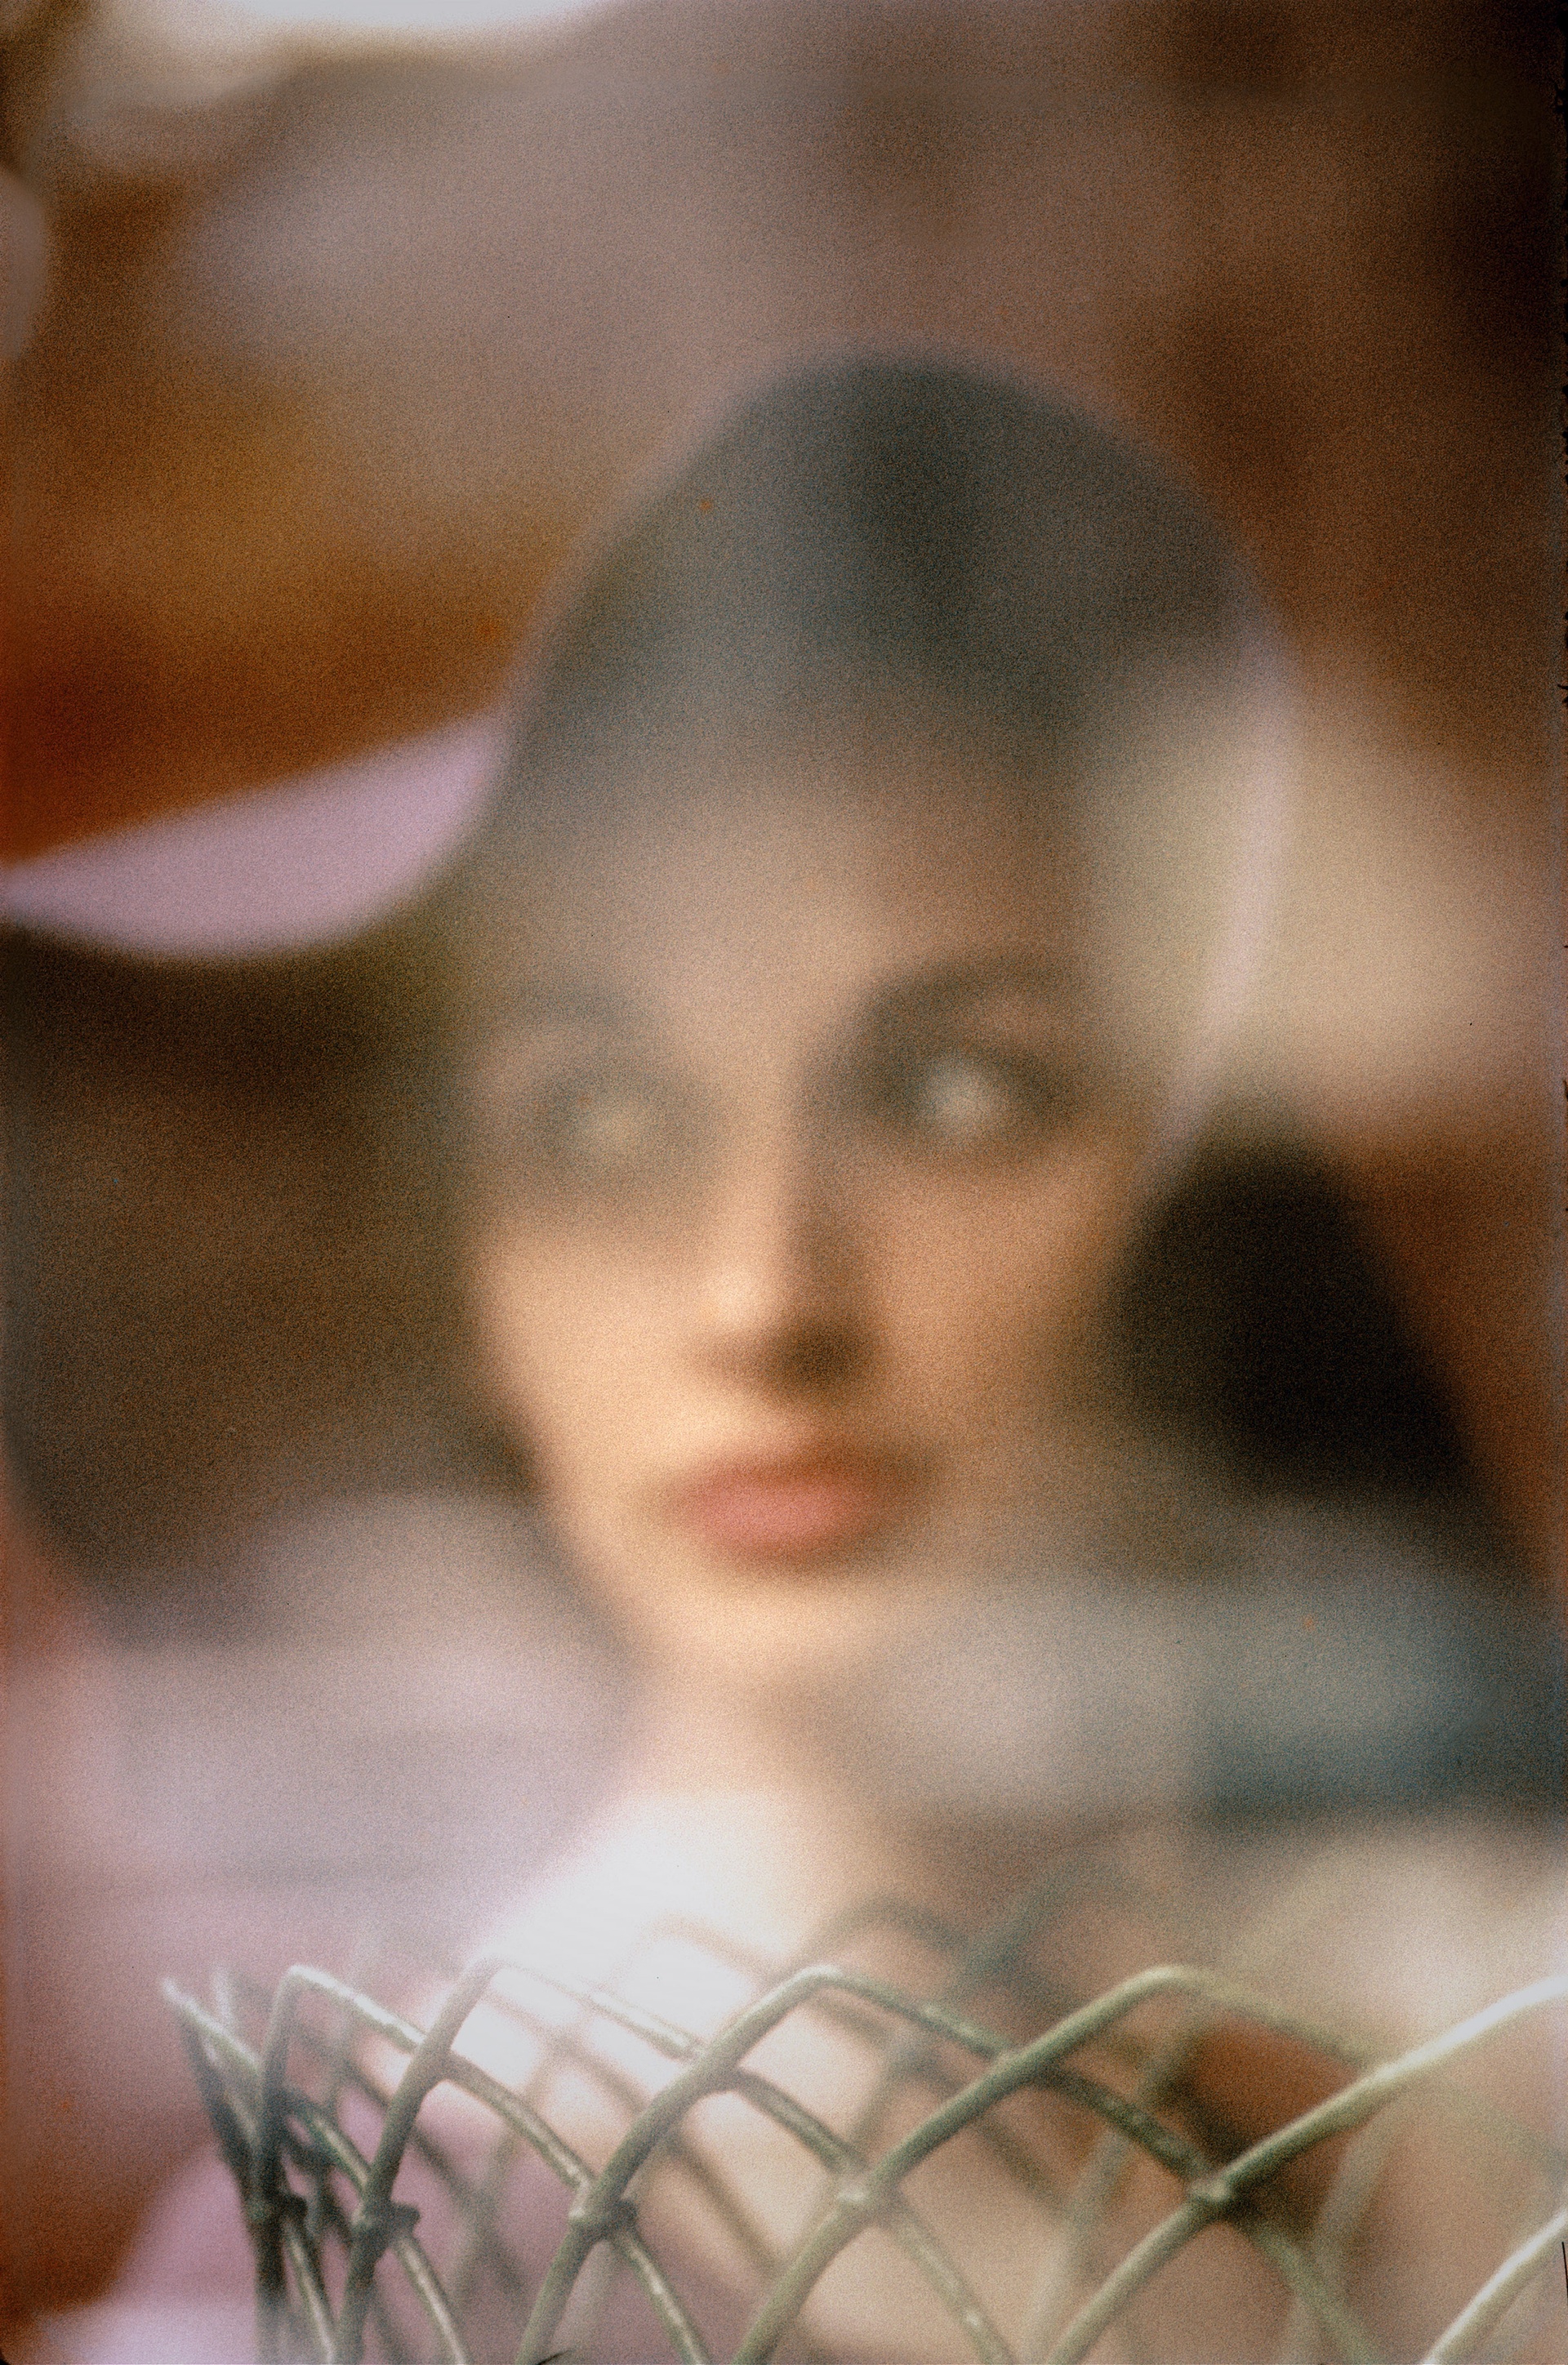 Woman by Saul Leiter